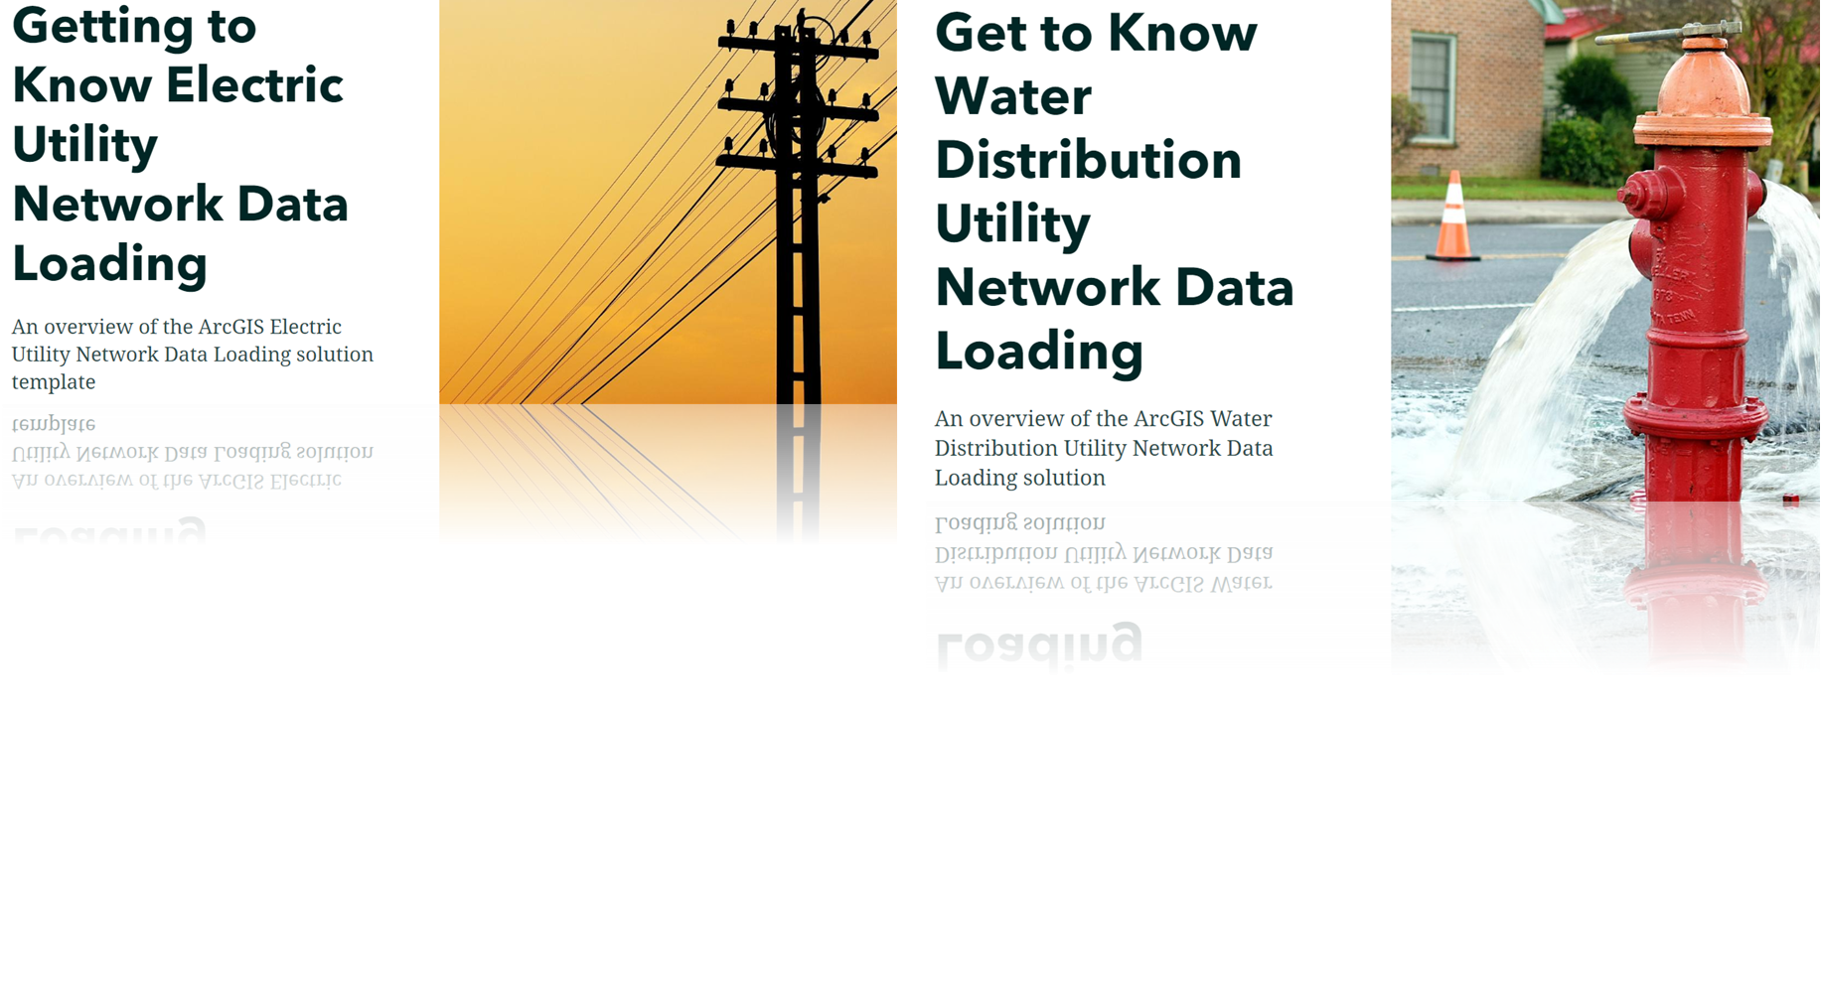 Configurations of the Data Loading Tools for Water and Electric Utilities data loading.